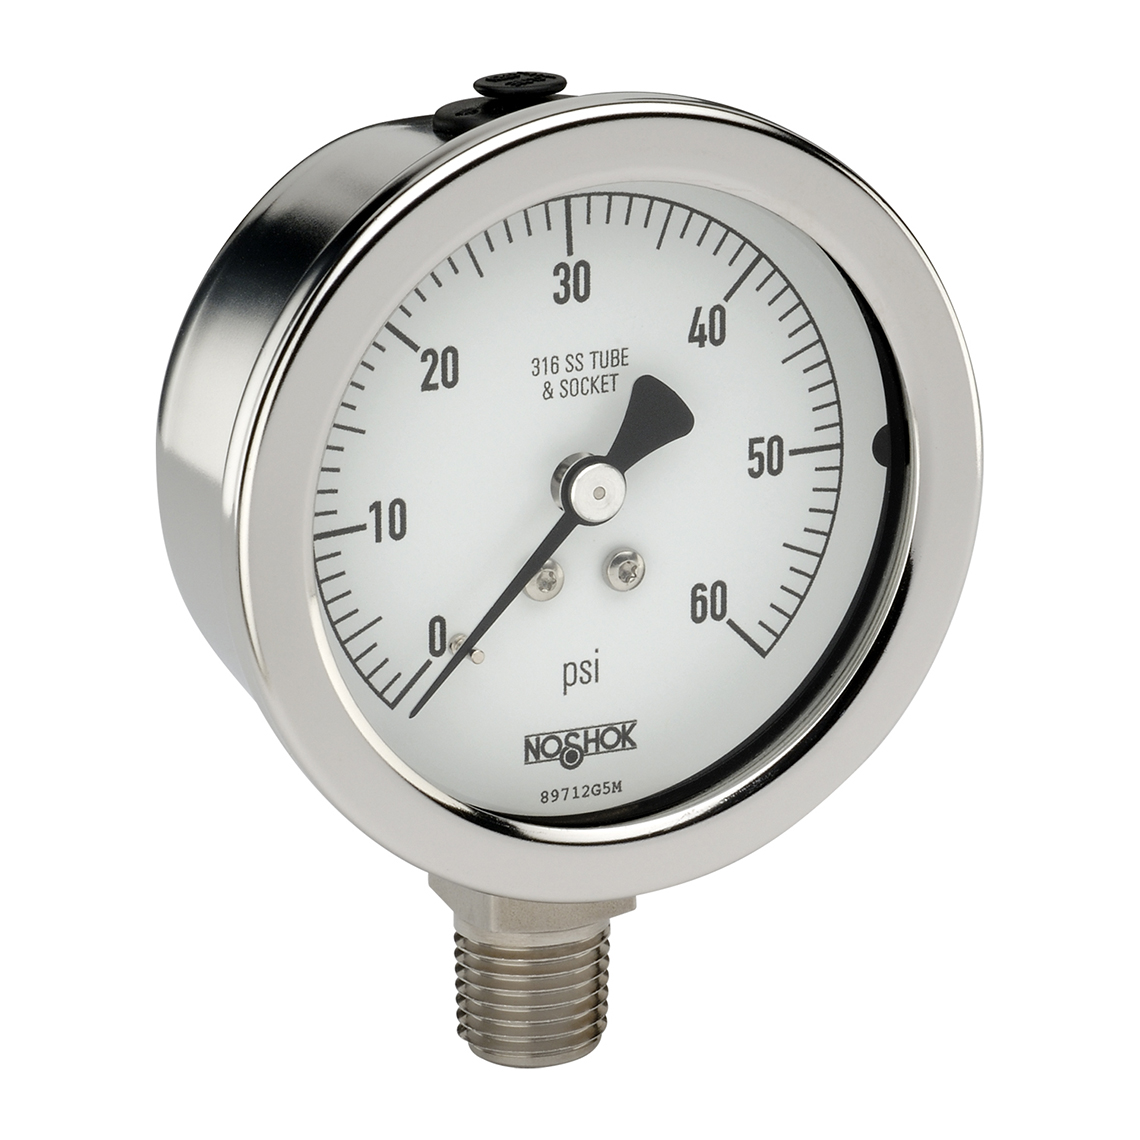 25-500-2000-psi/bar 400/500 Series All Stainless Steel Dry and Liquid Filled Pressure Gauges